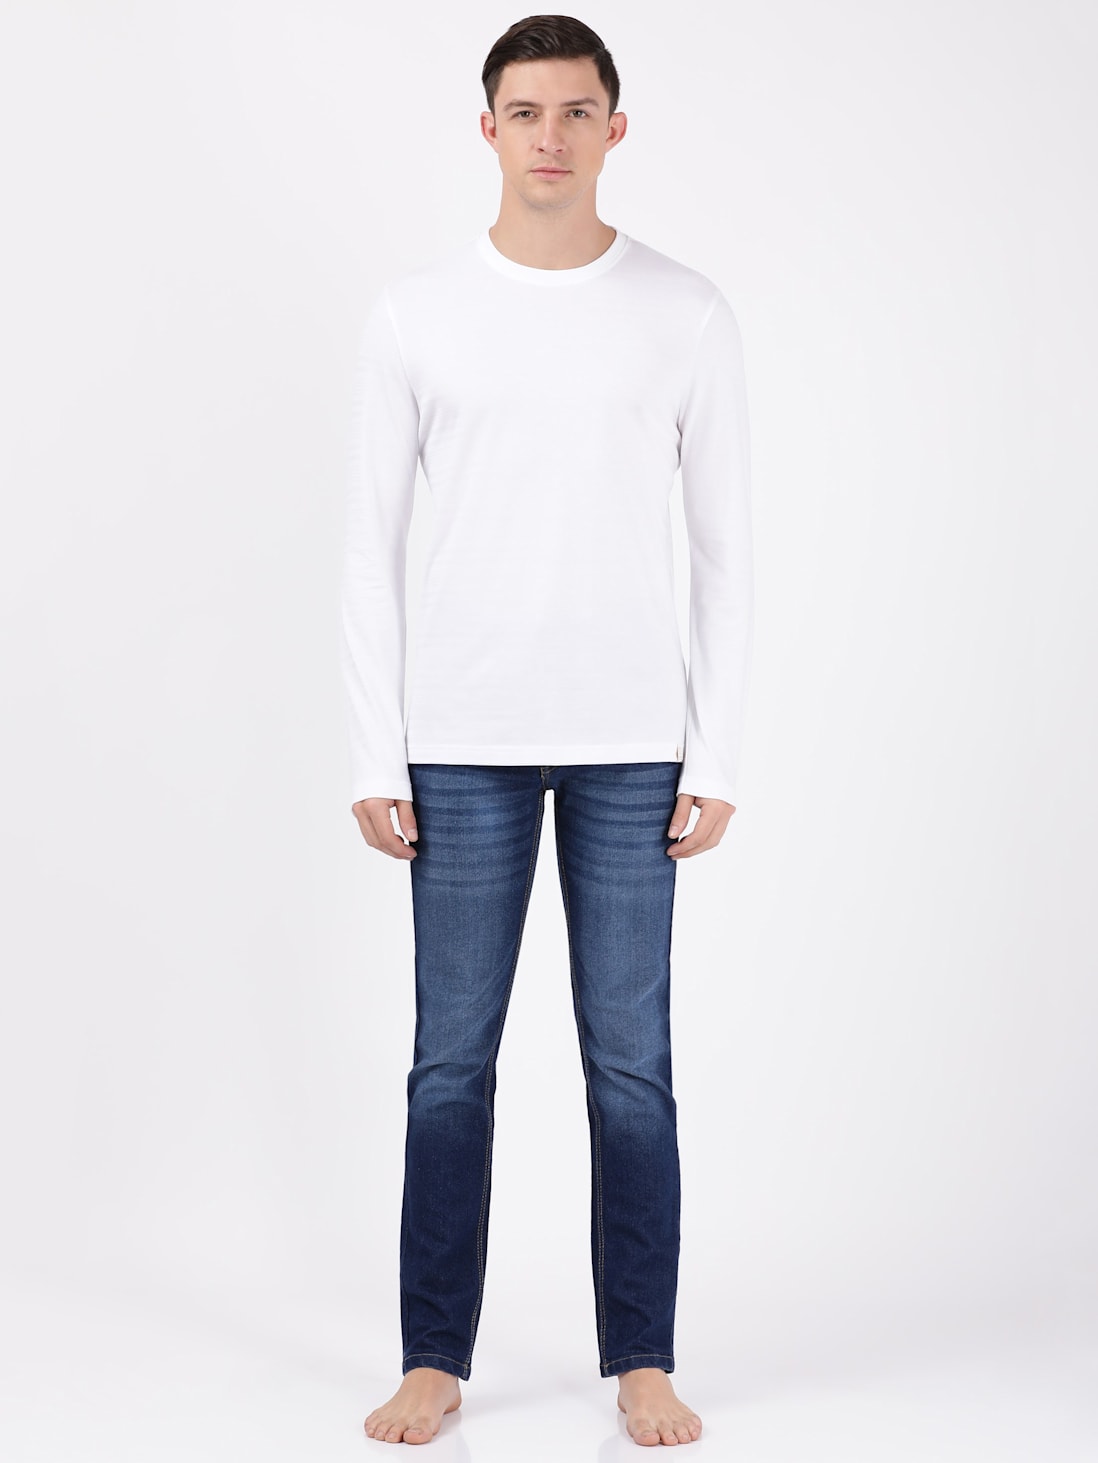 Buy Men's Super Combed Supima Cotton Solid Round Neck Full Sleeve T ...